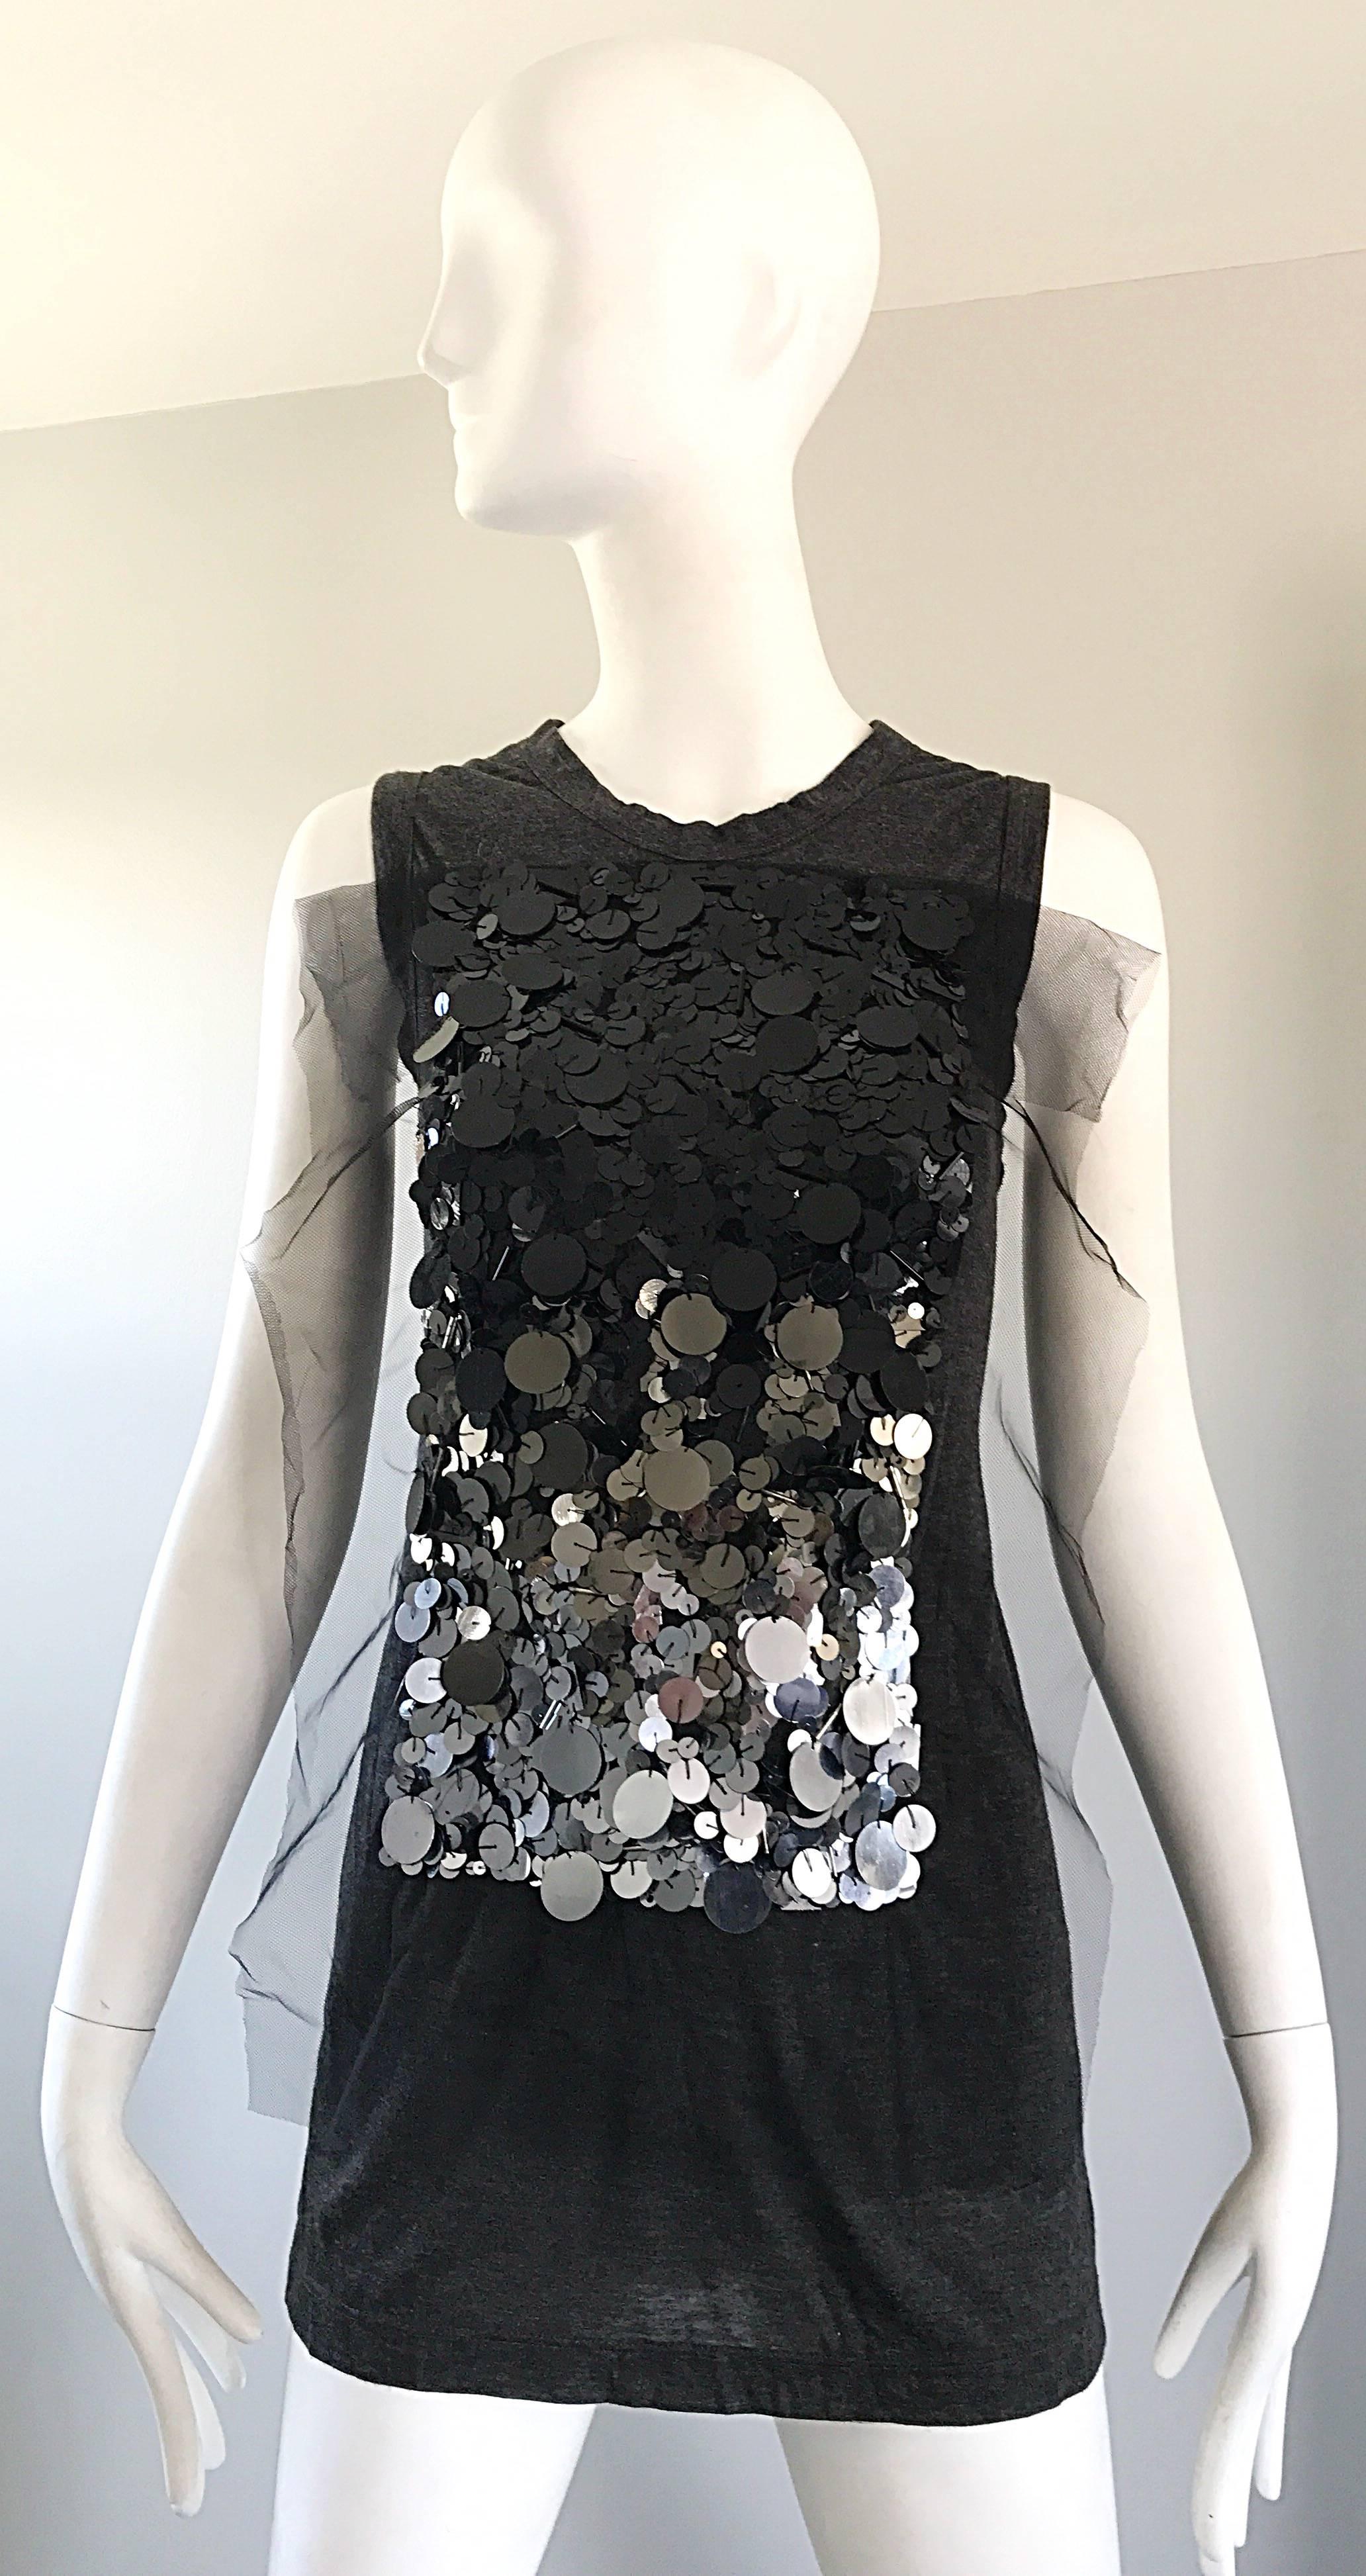 Smashing vintage 90s VERA WANG charcoal grey cotton top! Features a black tulle square panel on the front, with hundreds of hand-sewn sequin paillettes in silver, gunmetal and black (all in an array of sizes). Simply slips over the head. Soft cotton